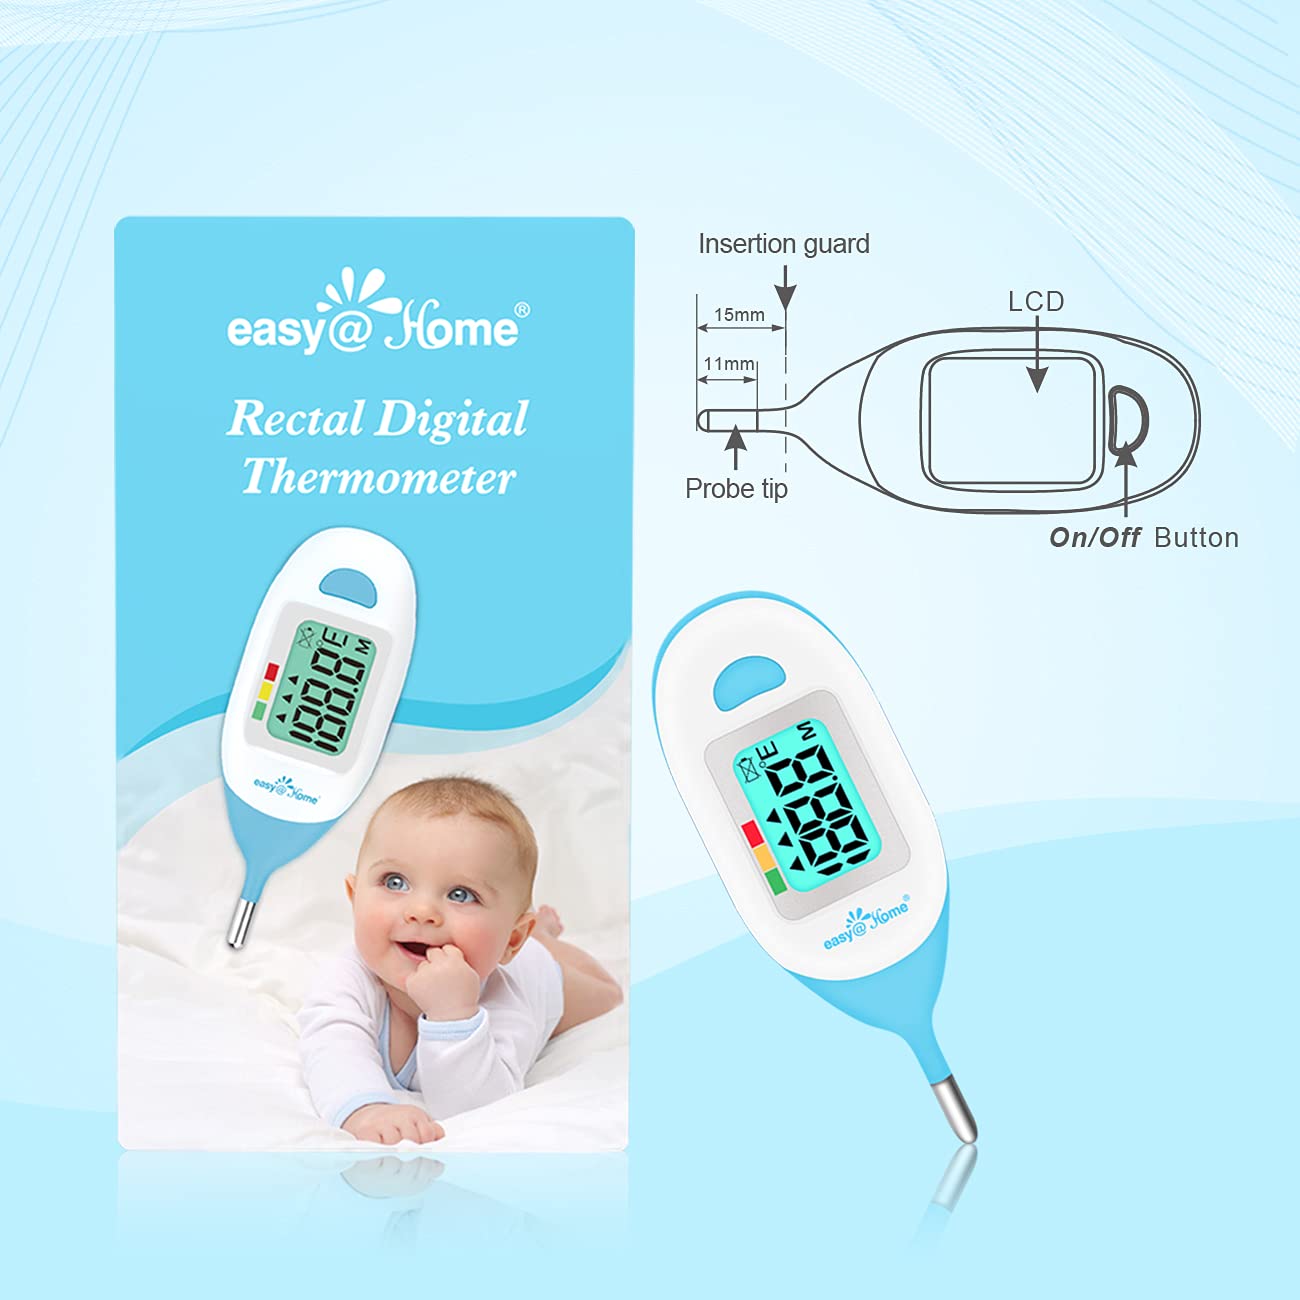 Baby Rectal Thermometer with Fever Indicator - Easy@Home Infant Digital Thermometer with LCD Display Reading Body Temperature-Baby Item with Accurate Fast Reading EMT-027 : Health & Household